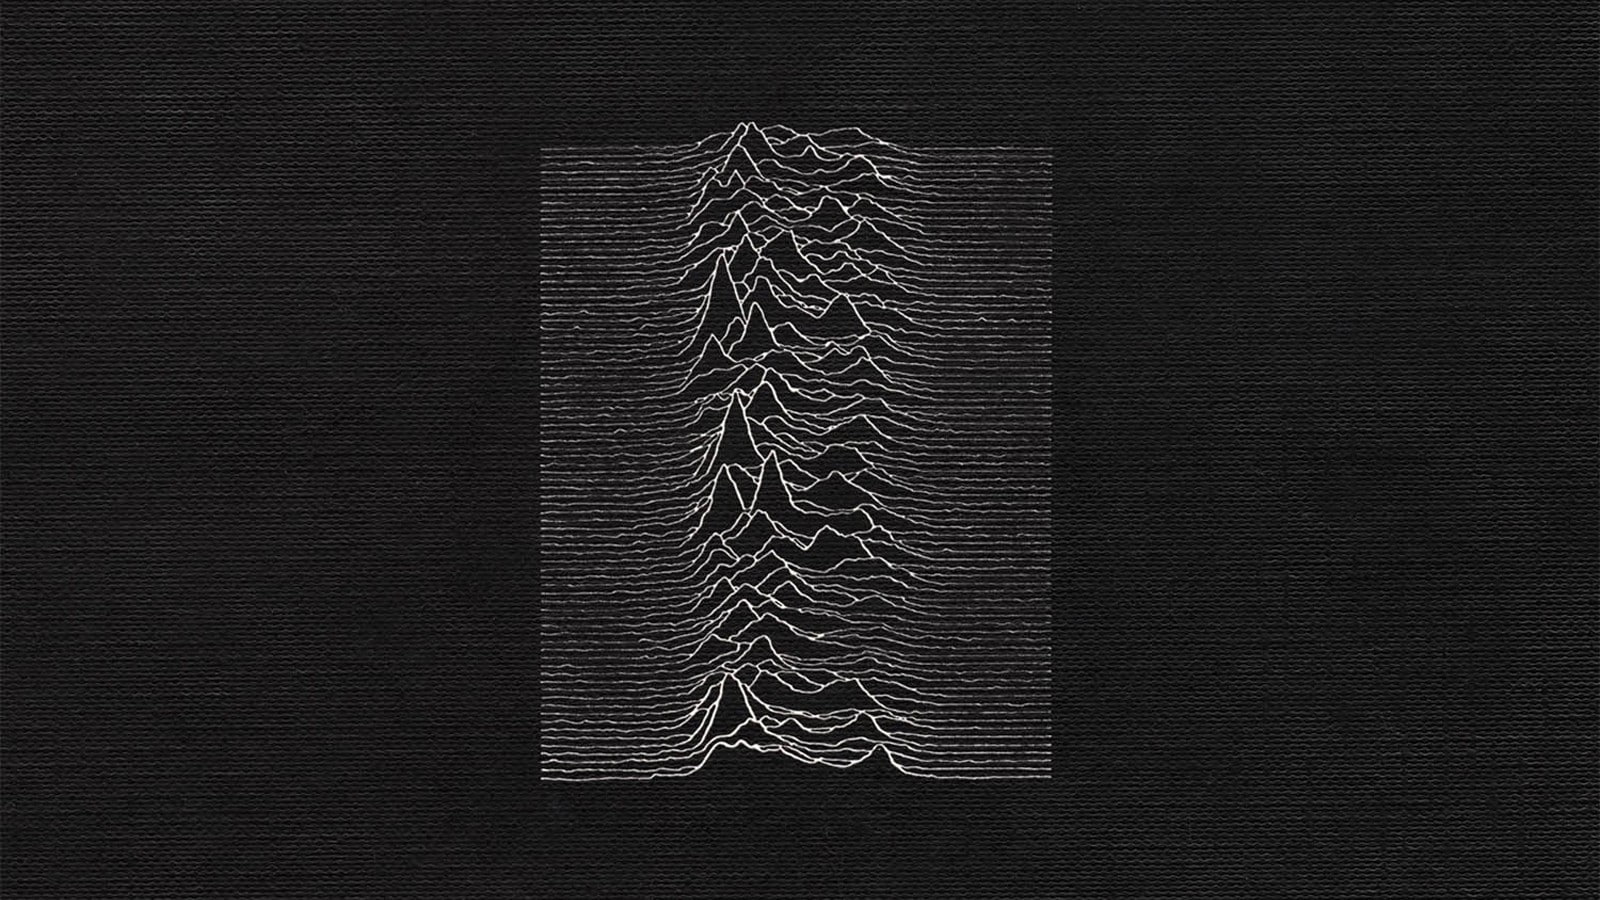 Joy Division, album covers, music, pattern, art and craft, indoors